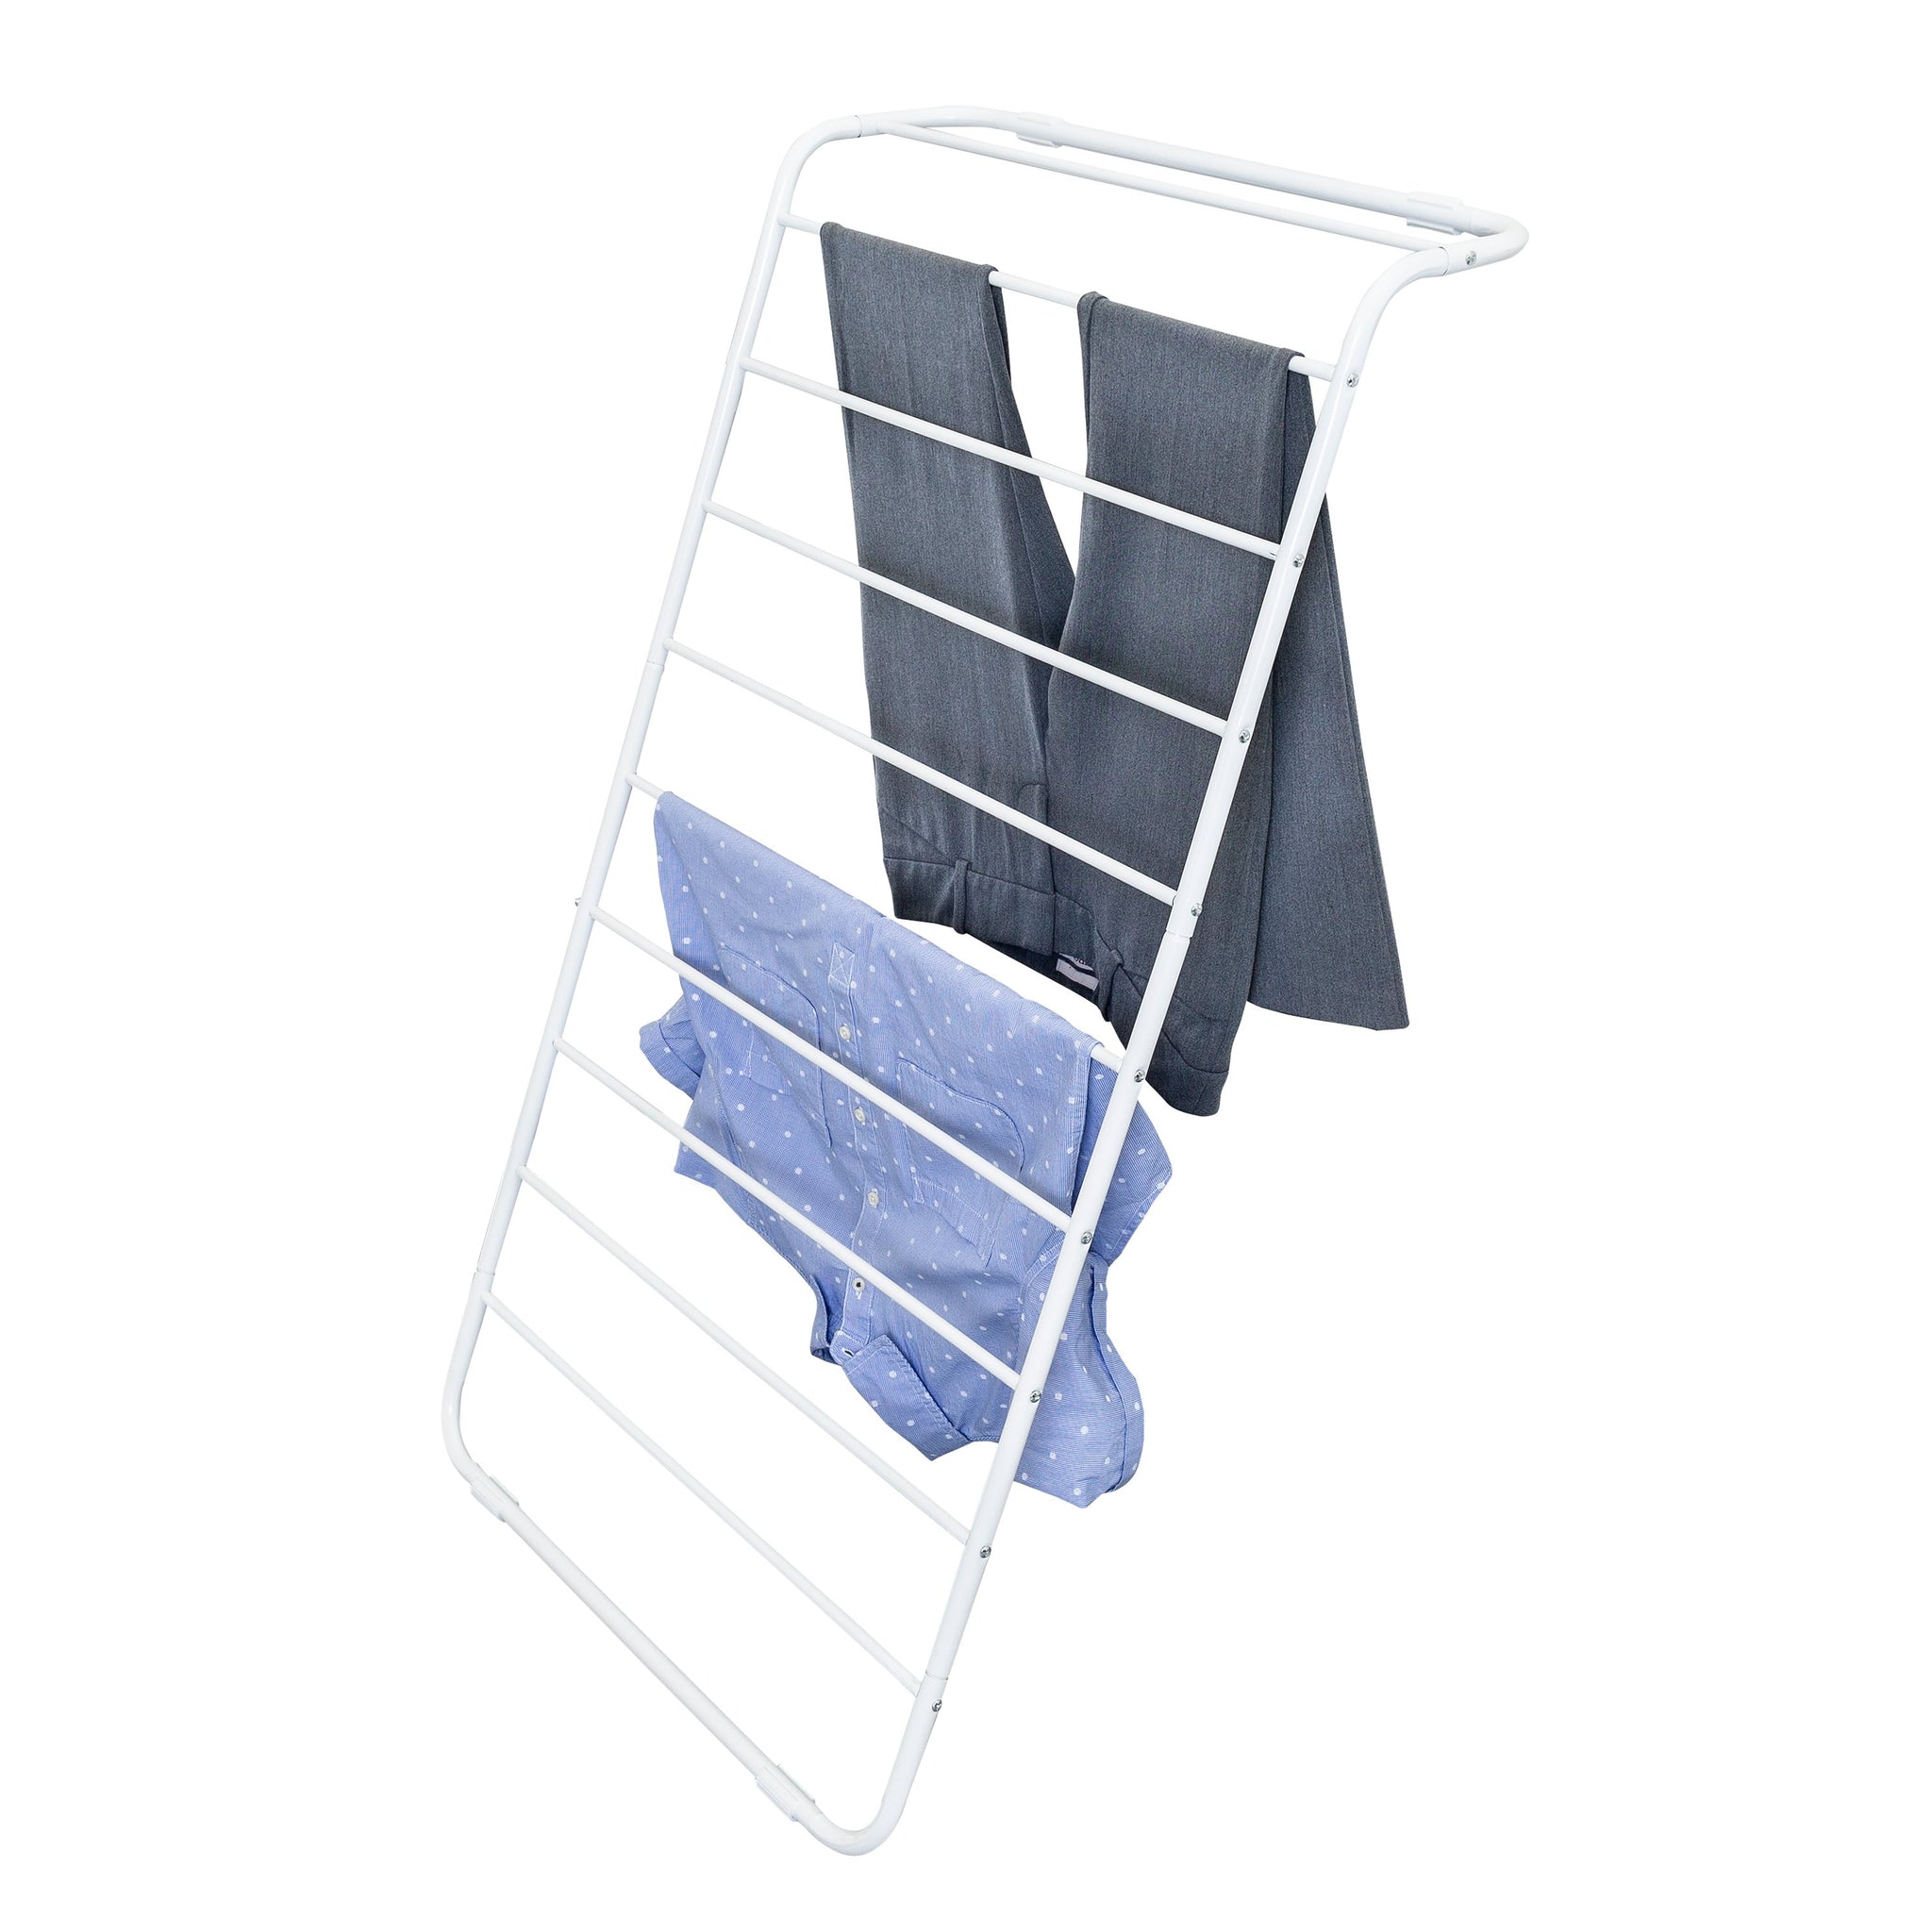 Leaning Clothes Drying Rack, White